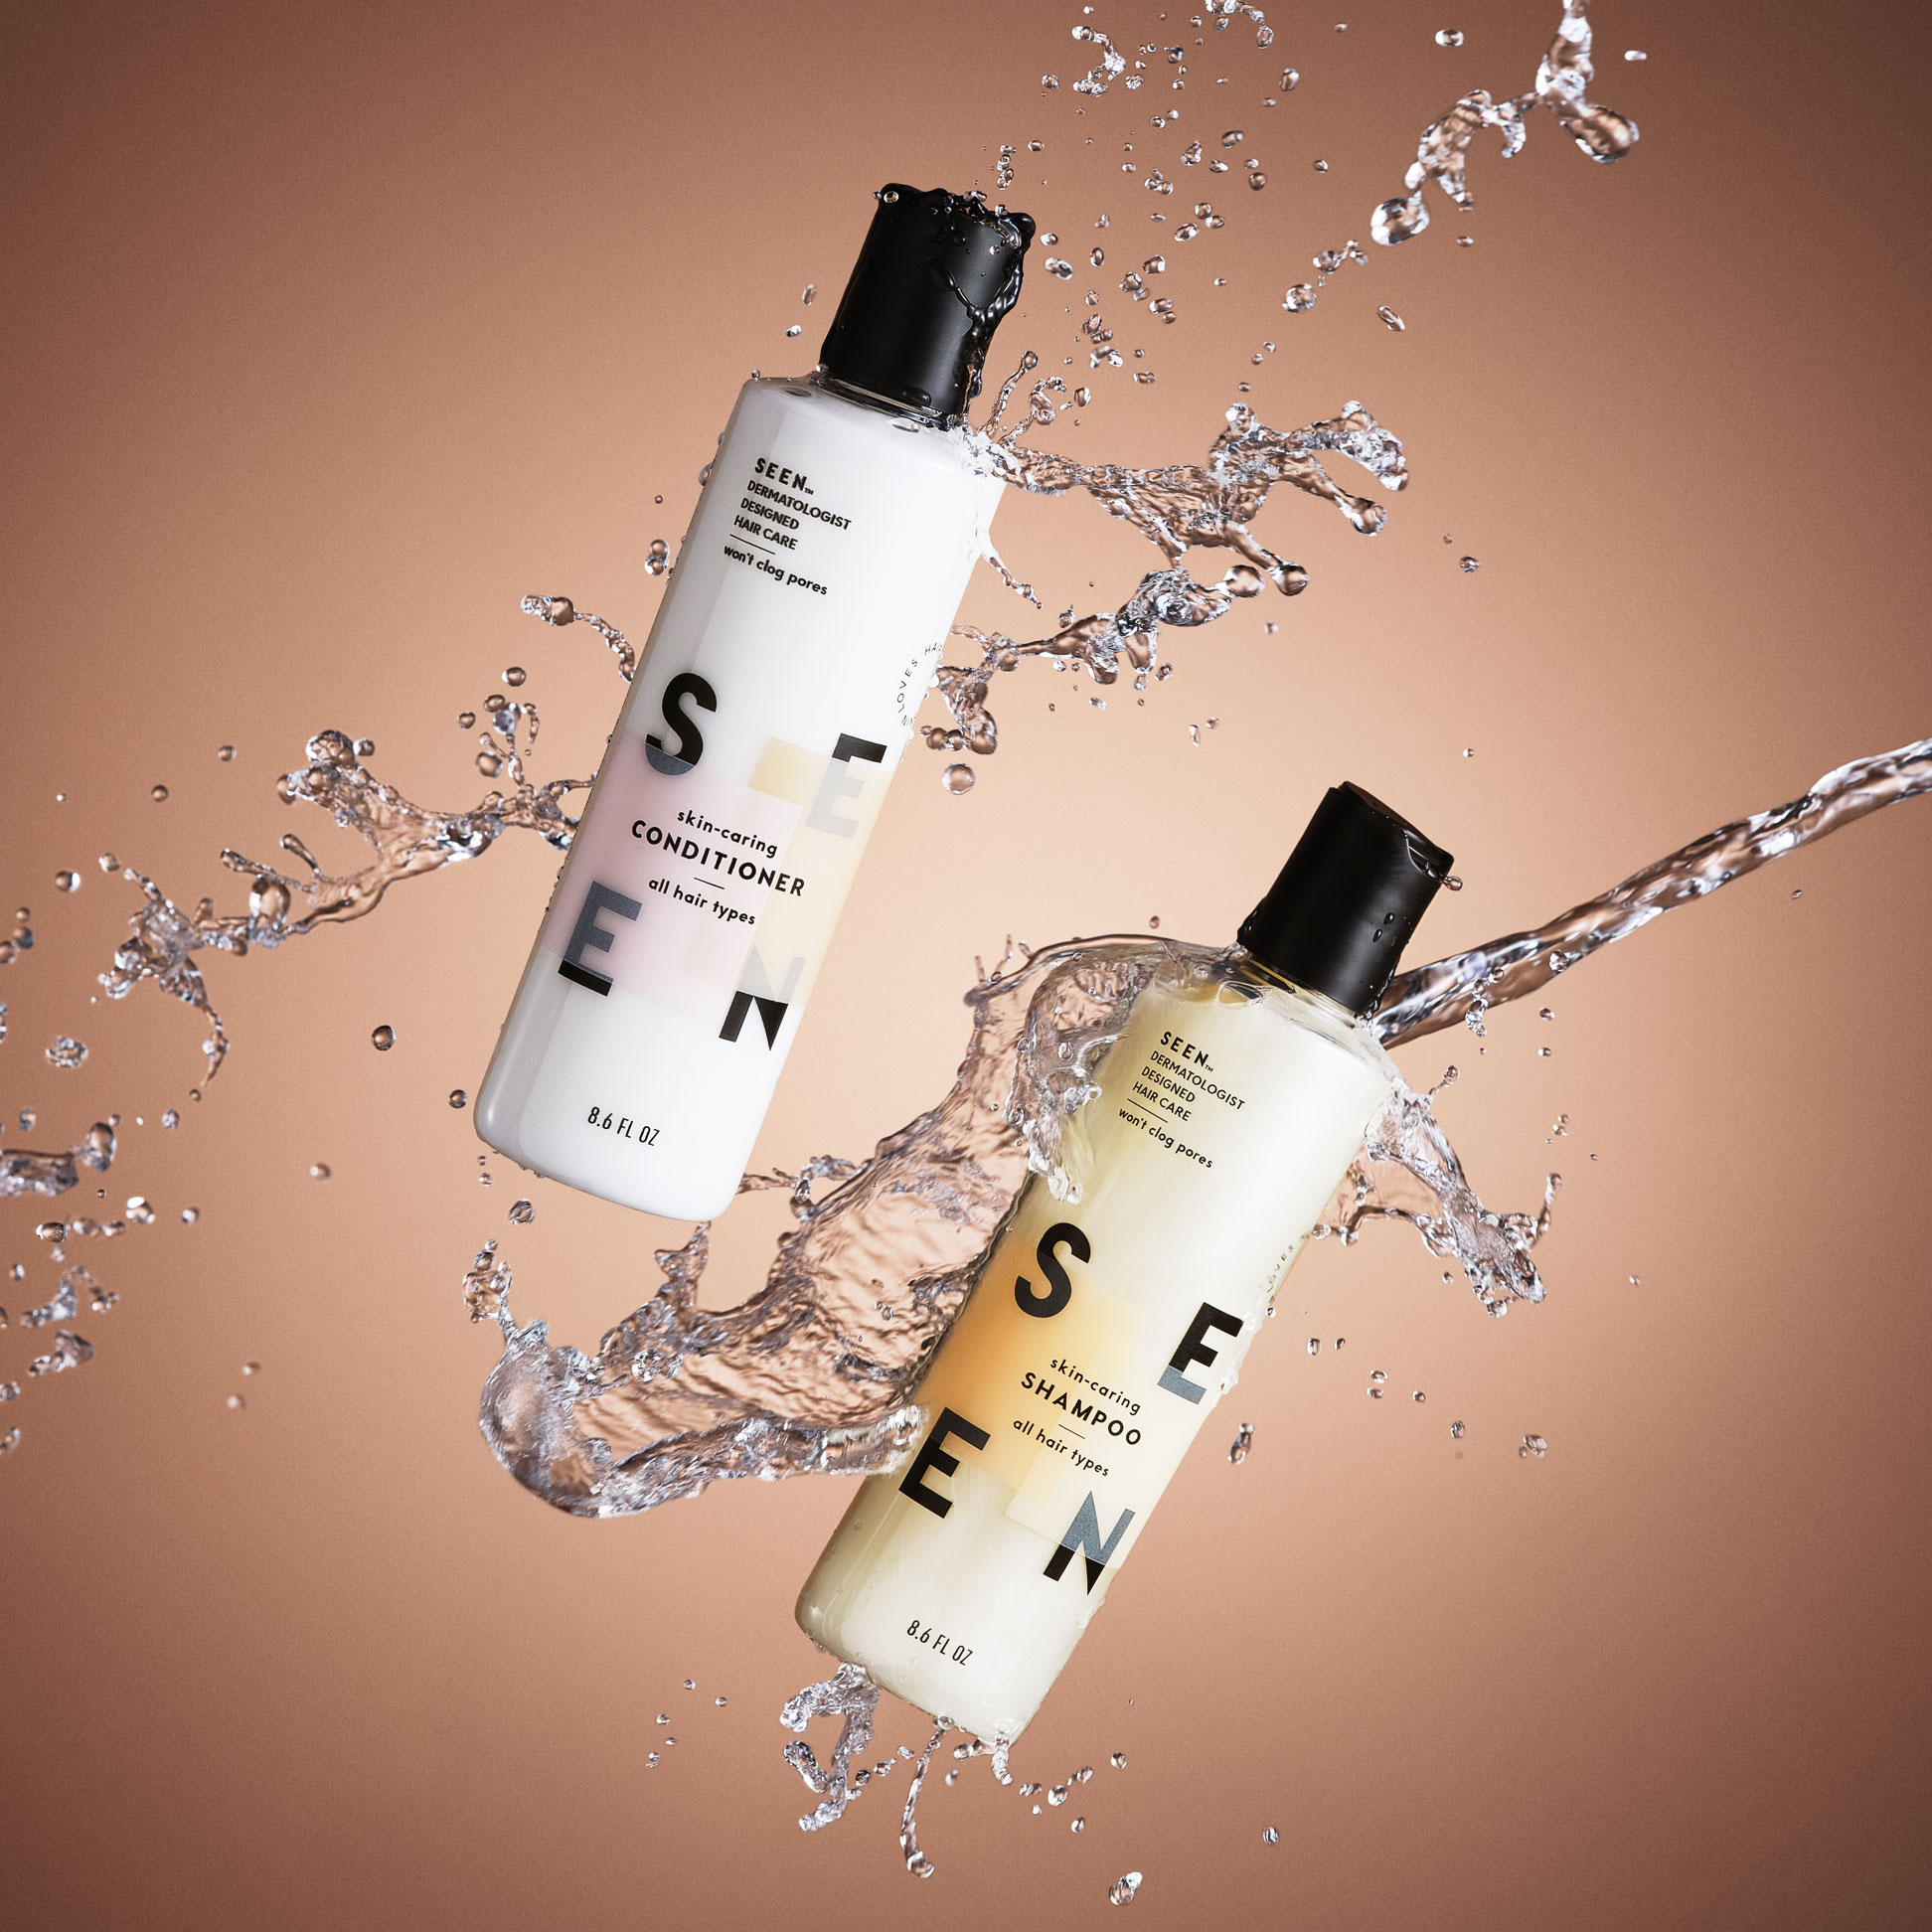 two bottles of seen haircare products floating with water splashes against a brown gradient background